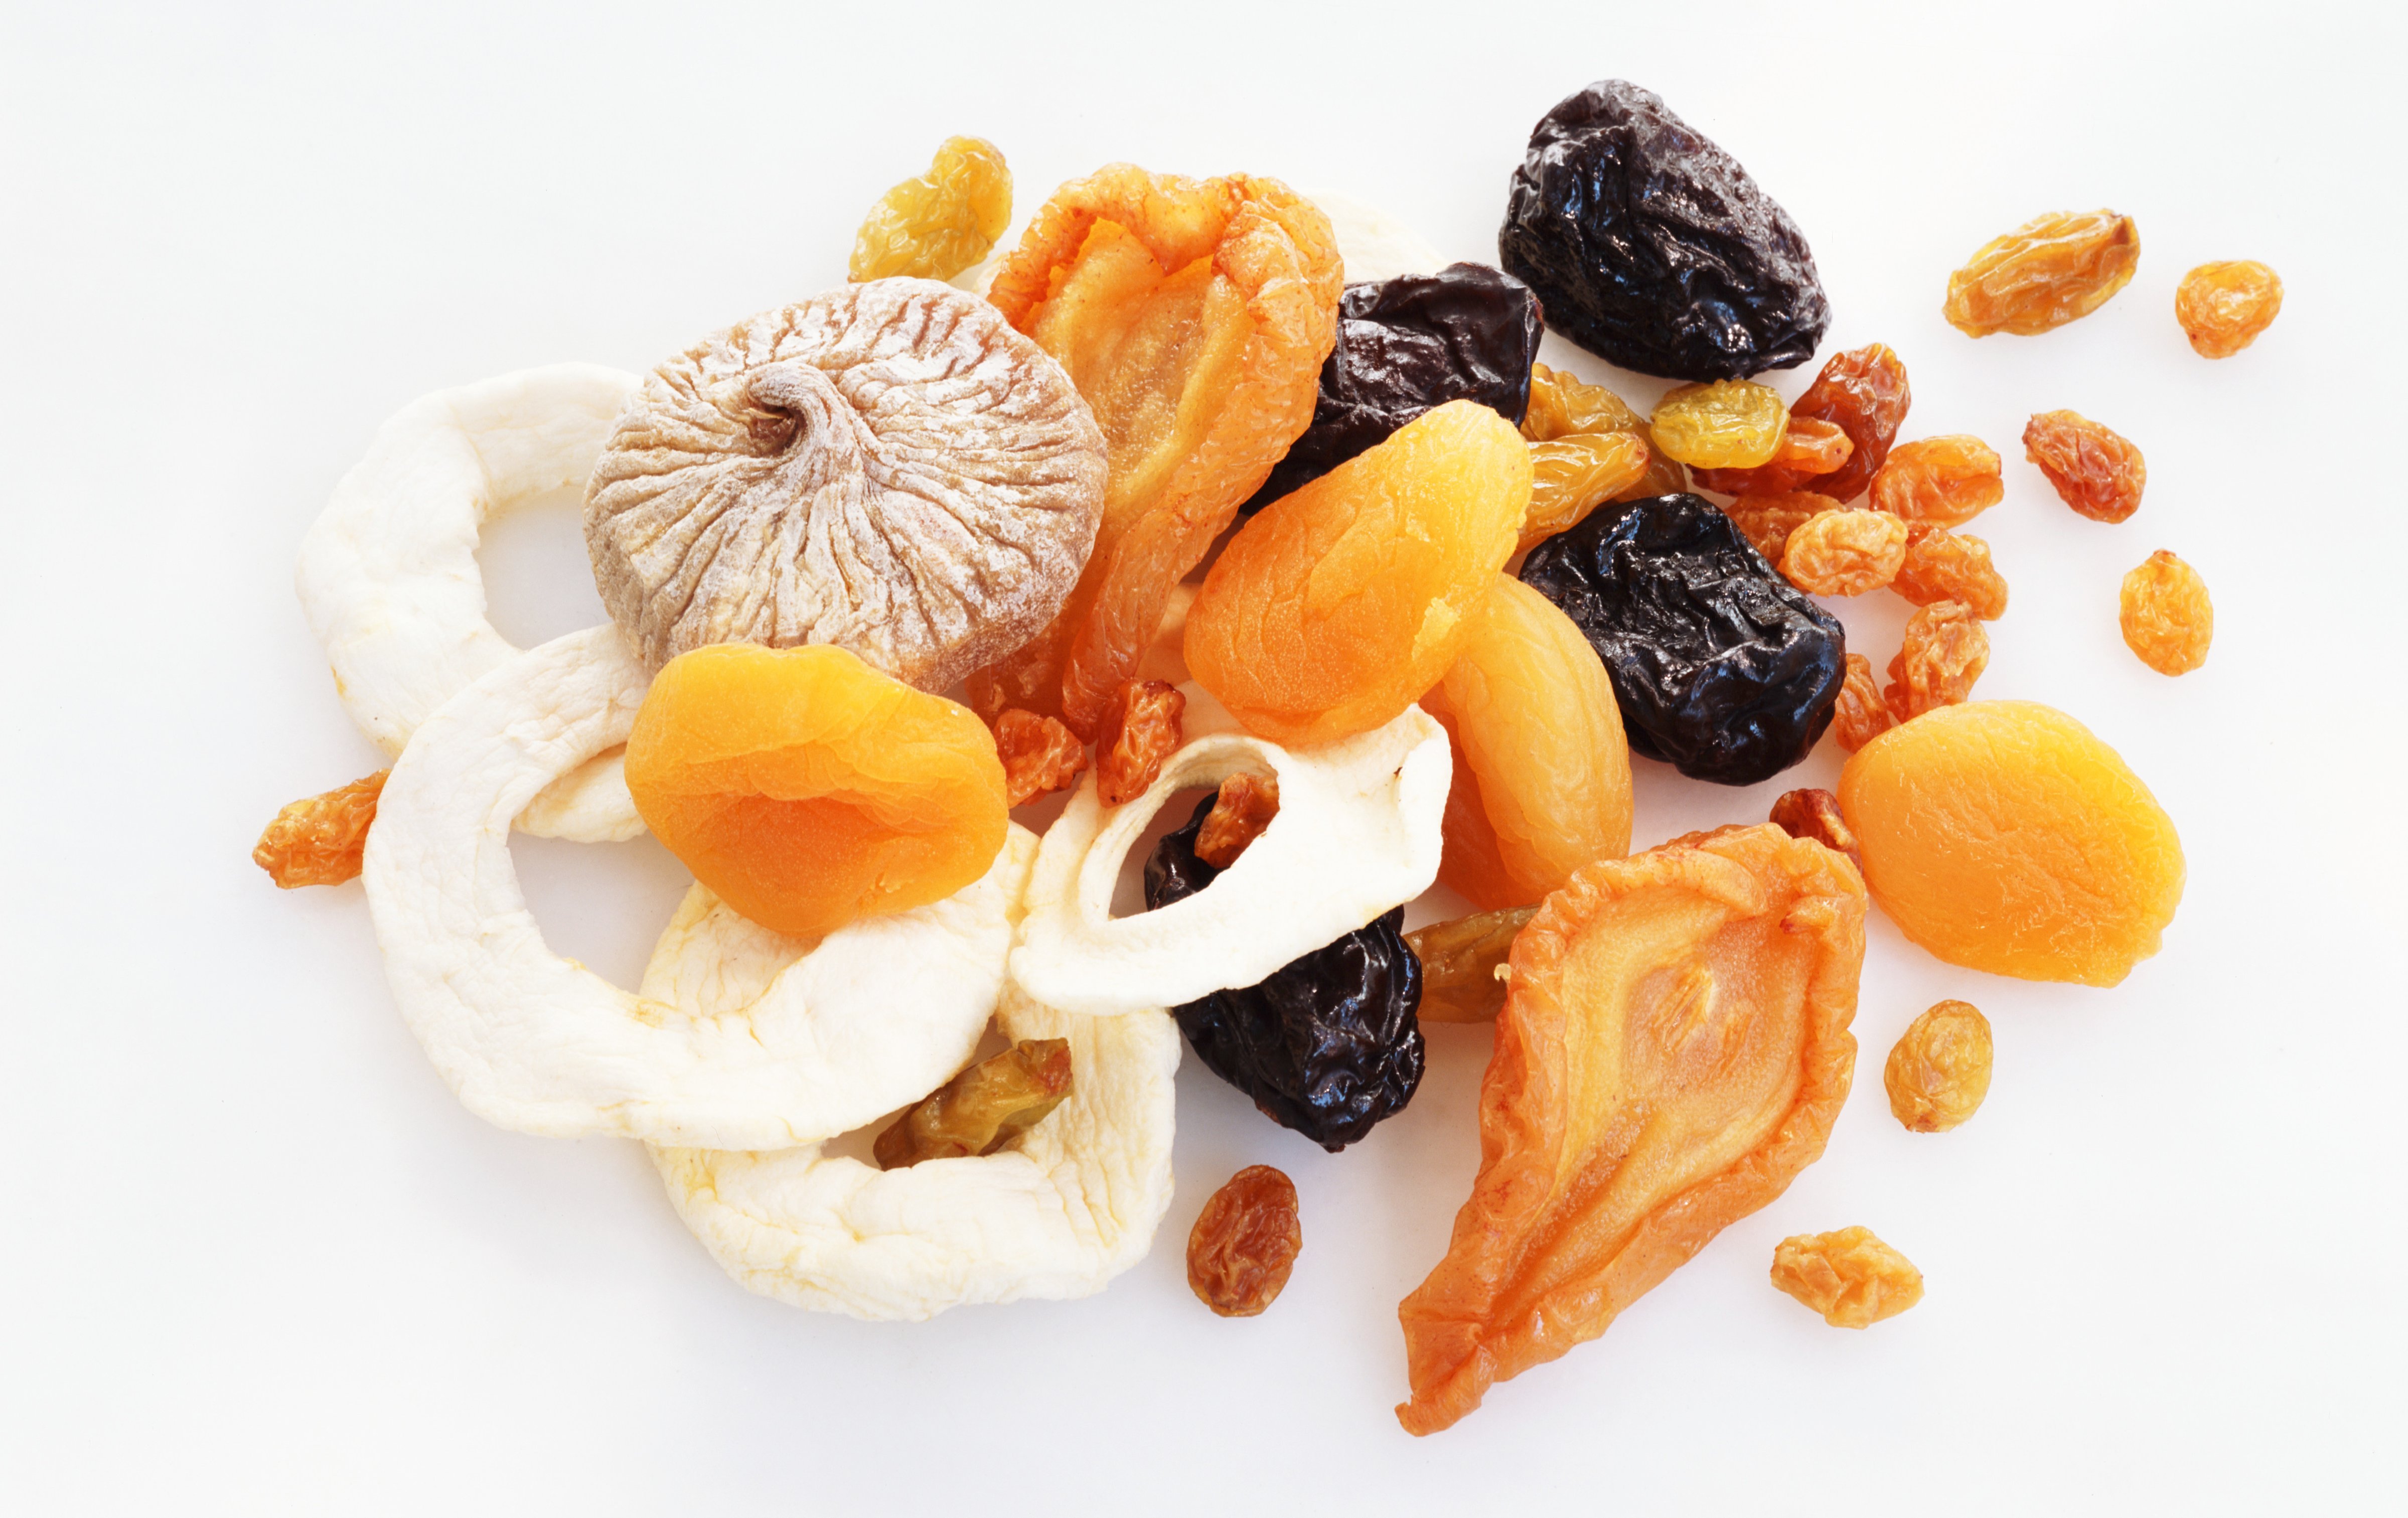 Apple, fig, apricot, sultanas, prunes and mangoe. (Maximilian Stock Ltd. — Getty Images)